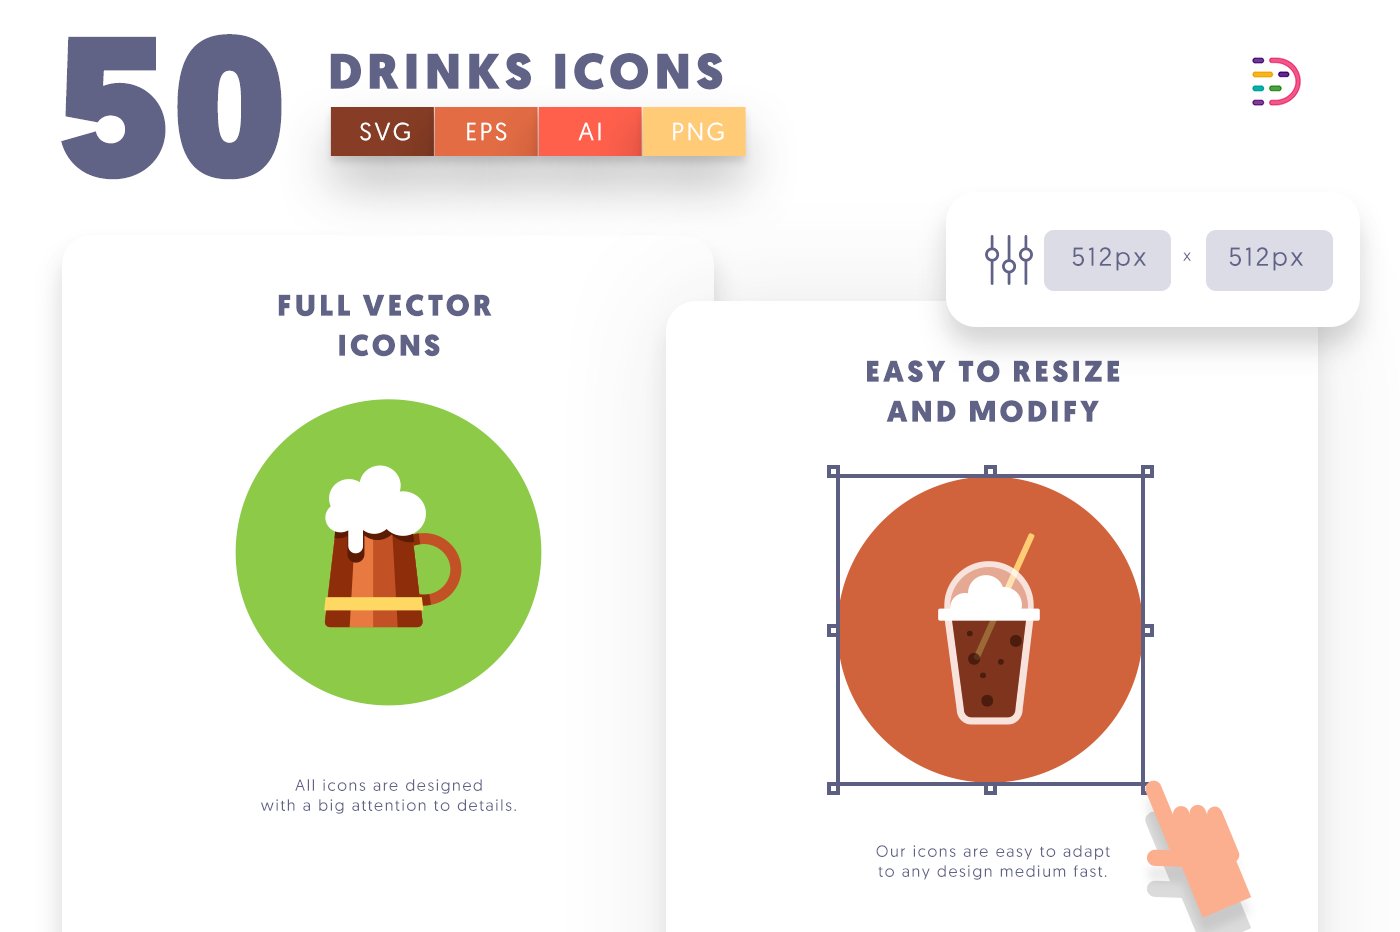 50 drinks icons cover 6 163